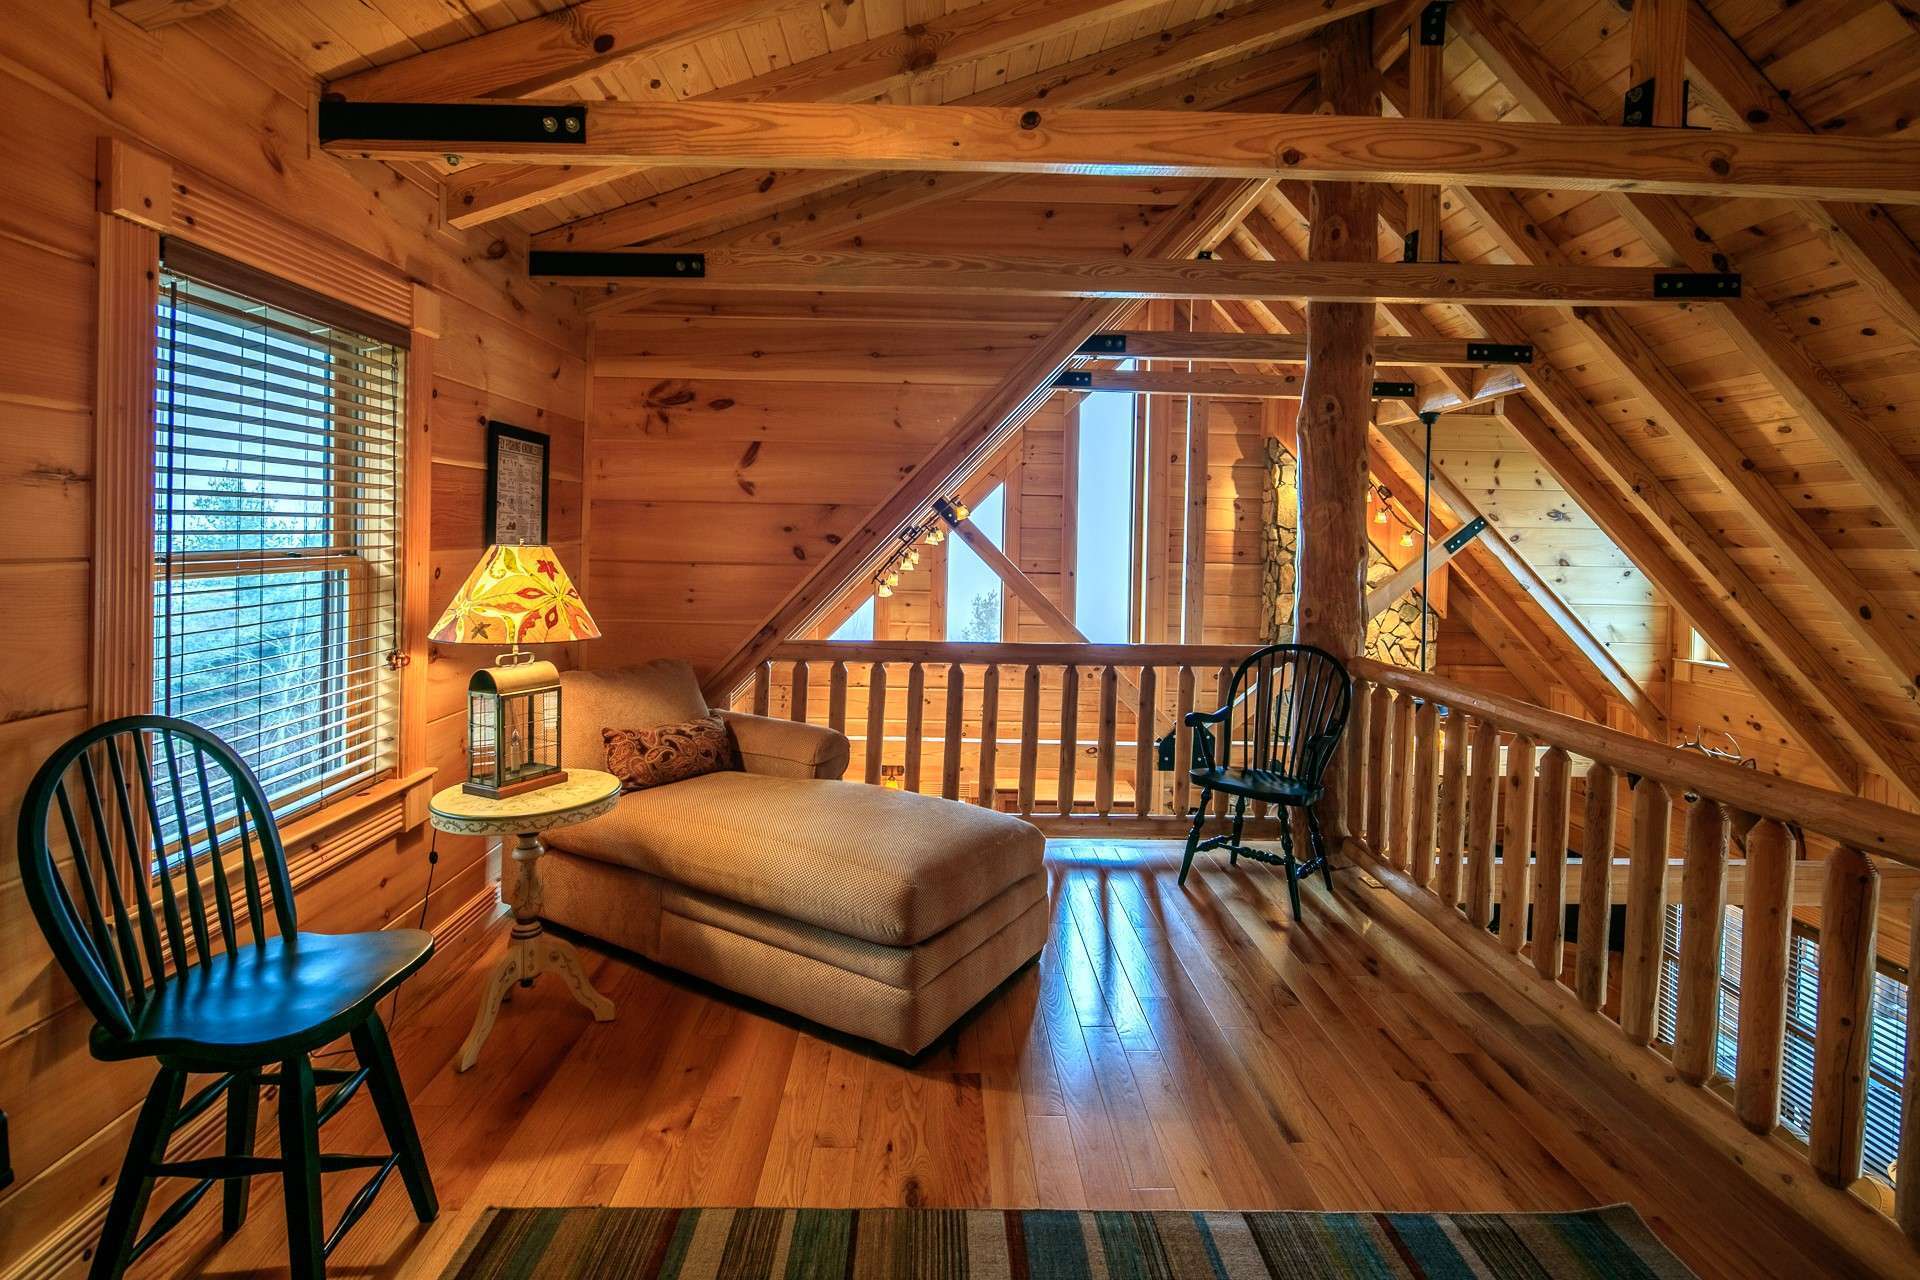 On the upper level you will find this open loft area overlooking the great room.